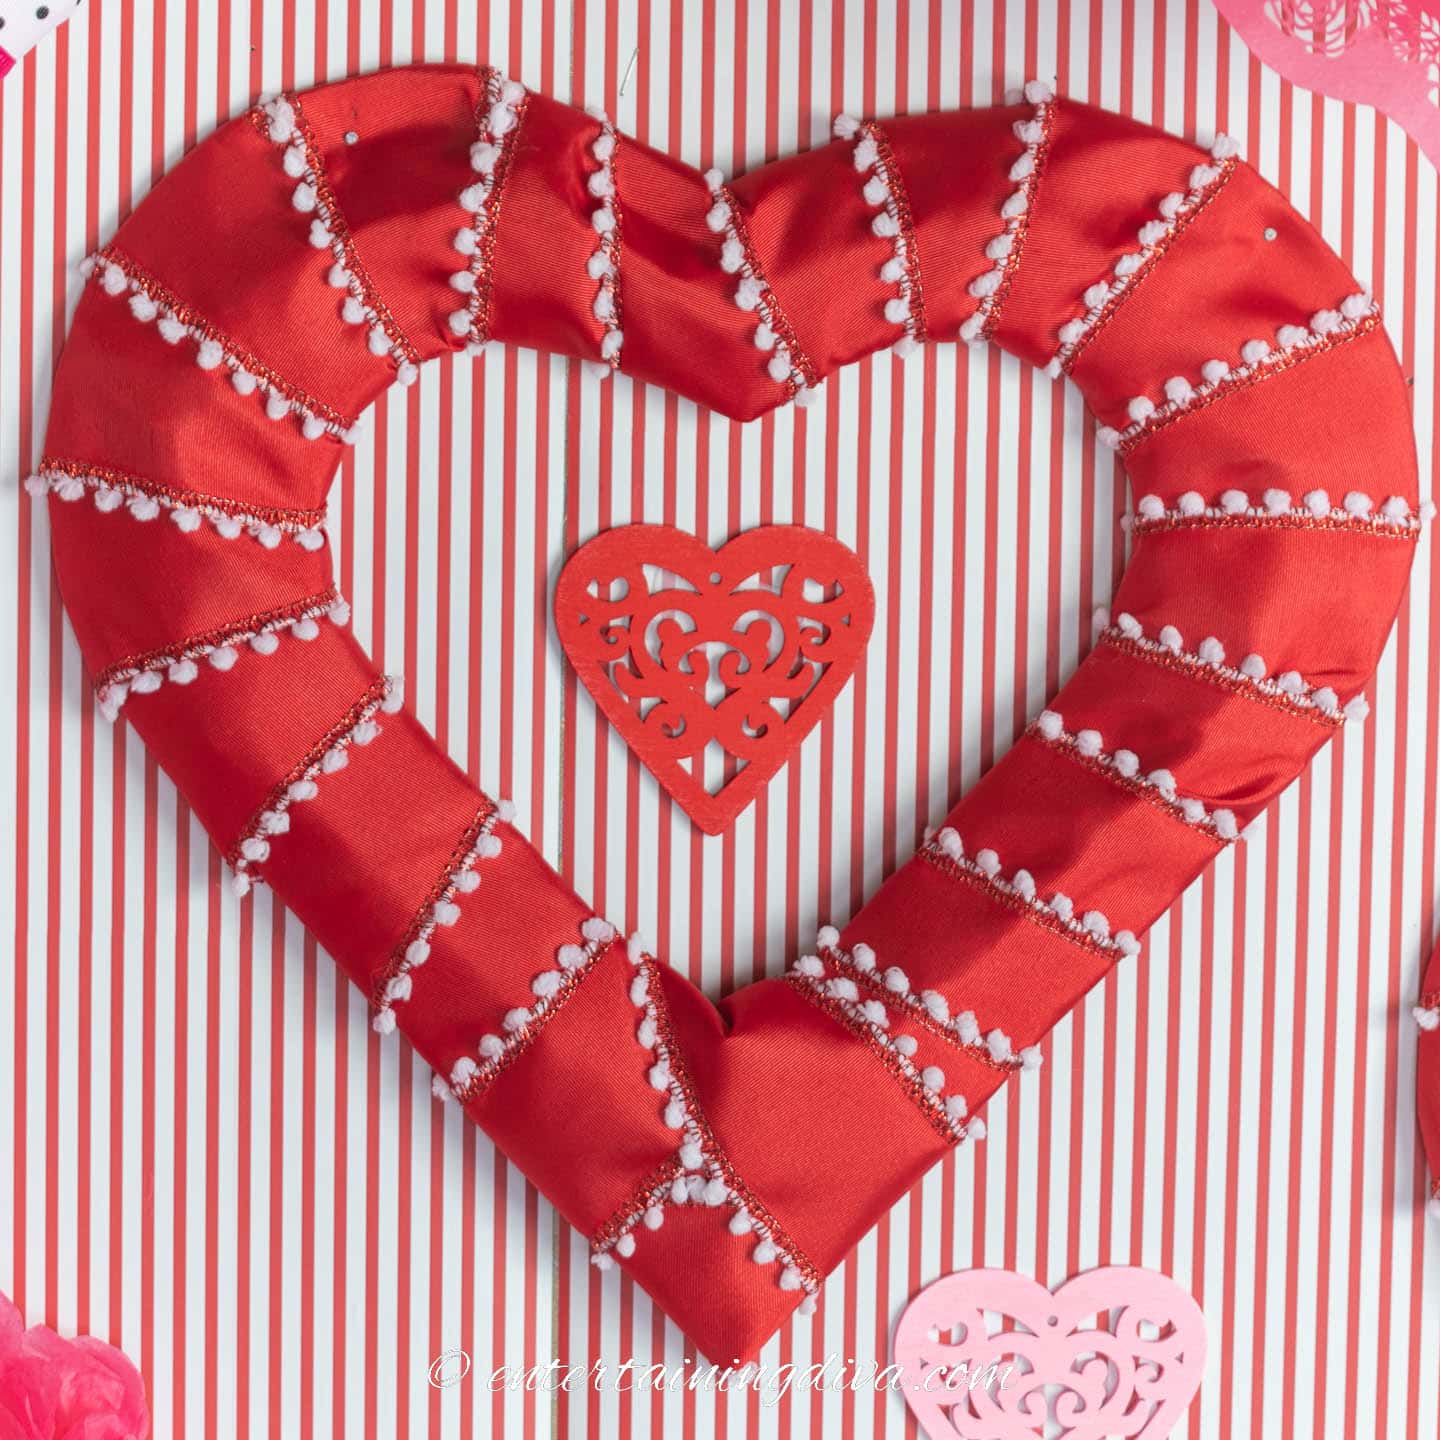 DIY heart wreath made with red and white ribbon